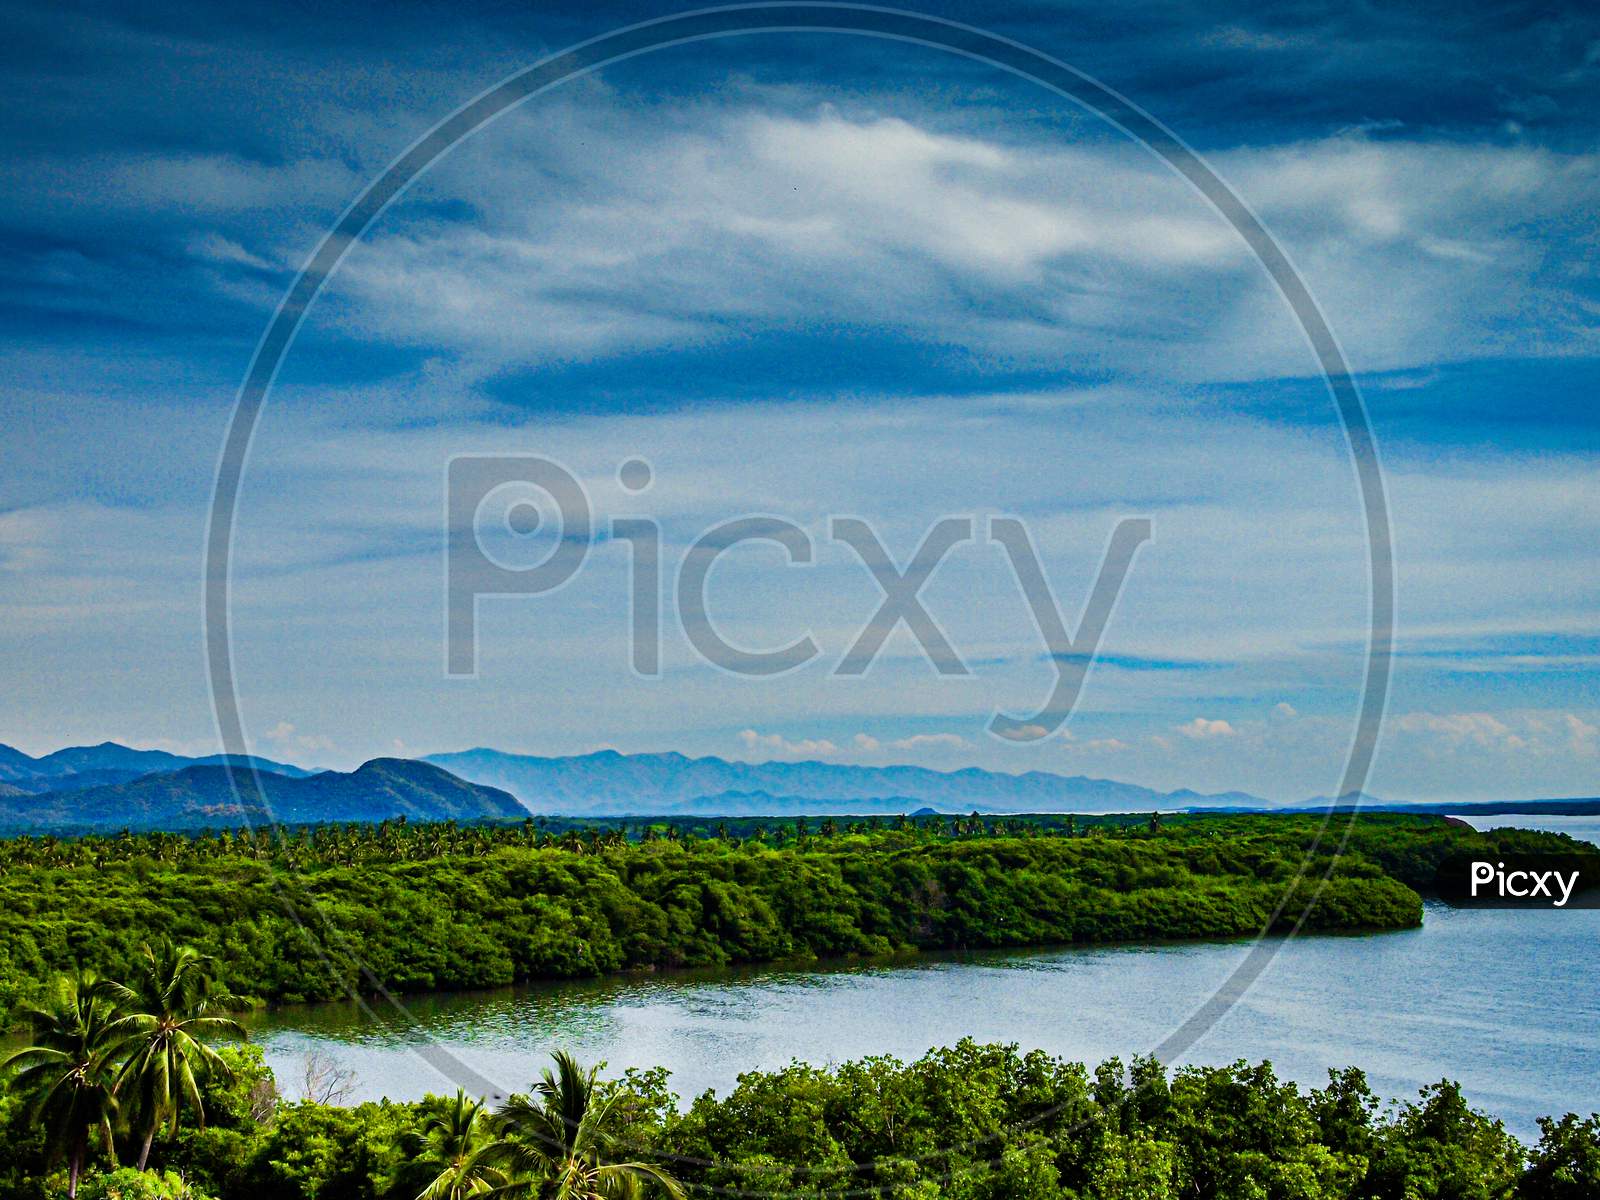 Cuyutlan Lagoon Surrounded By Tropical Vegetation, Spring Day With A Cloudy Sky With Abundant Clouds In Manzanillo, Colima Mexico